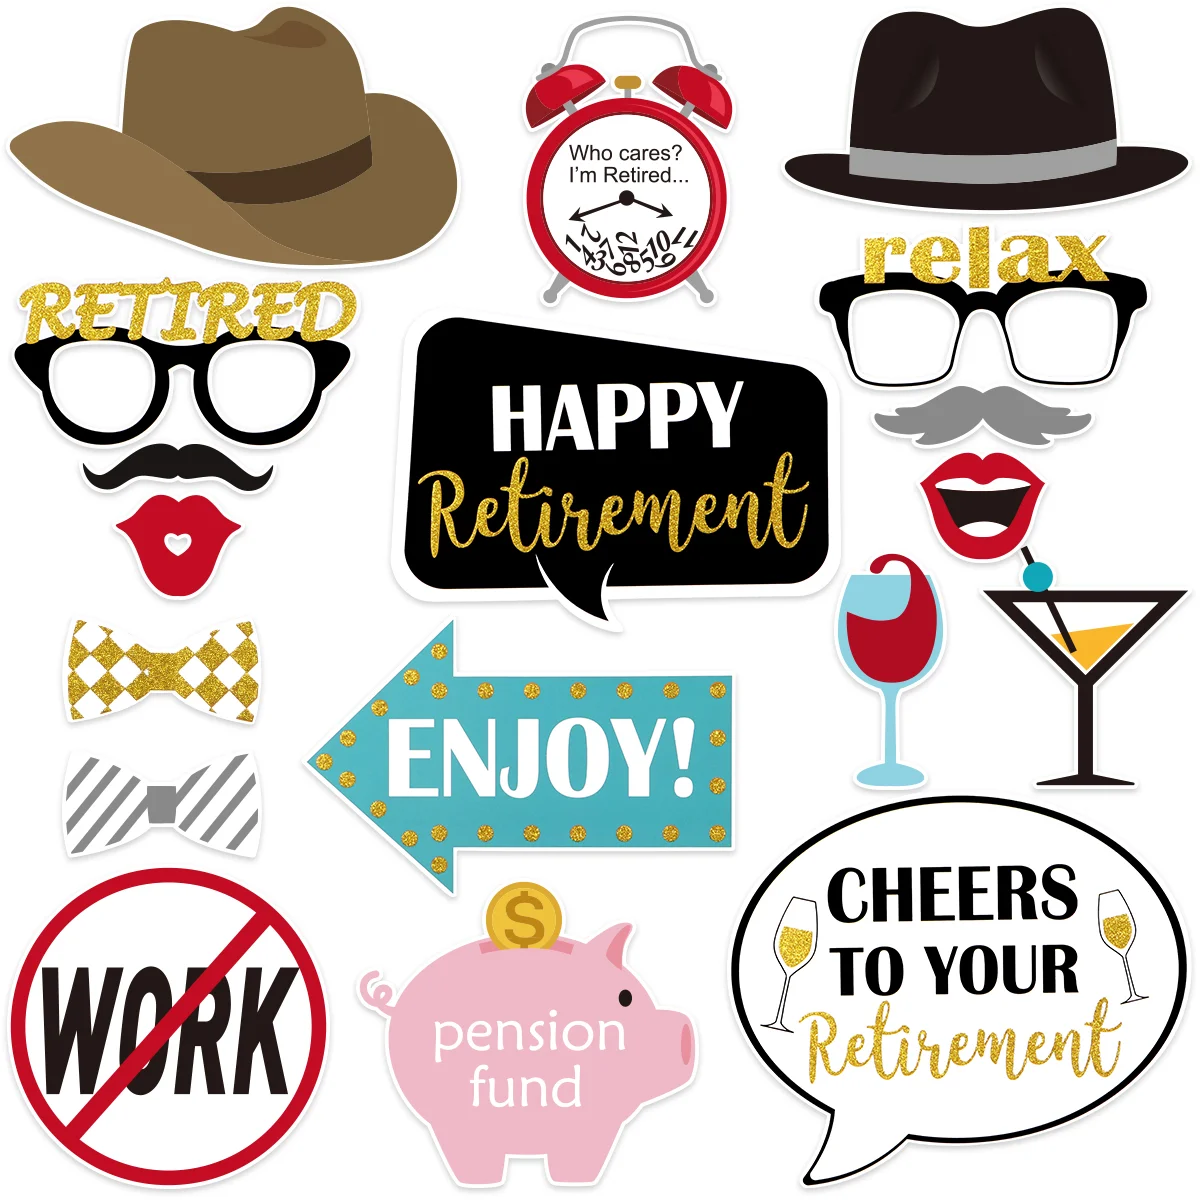 

18PCS Retired Party Photo Booth Props Retirement Selfie Decoration Retirement Party Photo Props Retirement Photo Backdrop